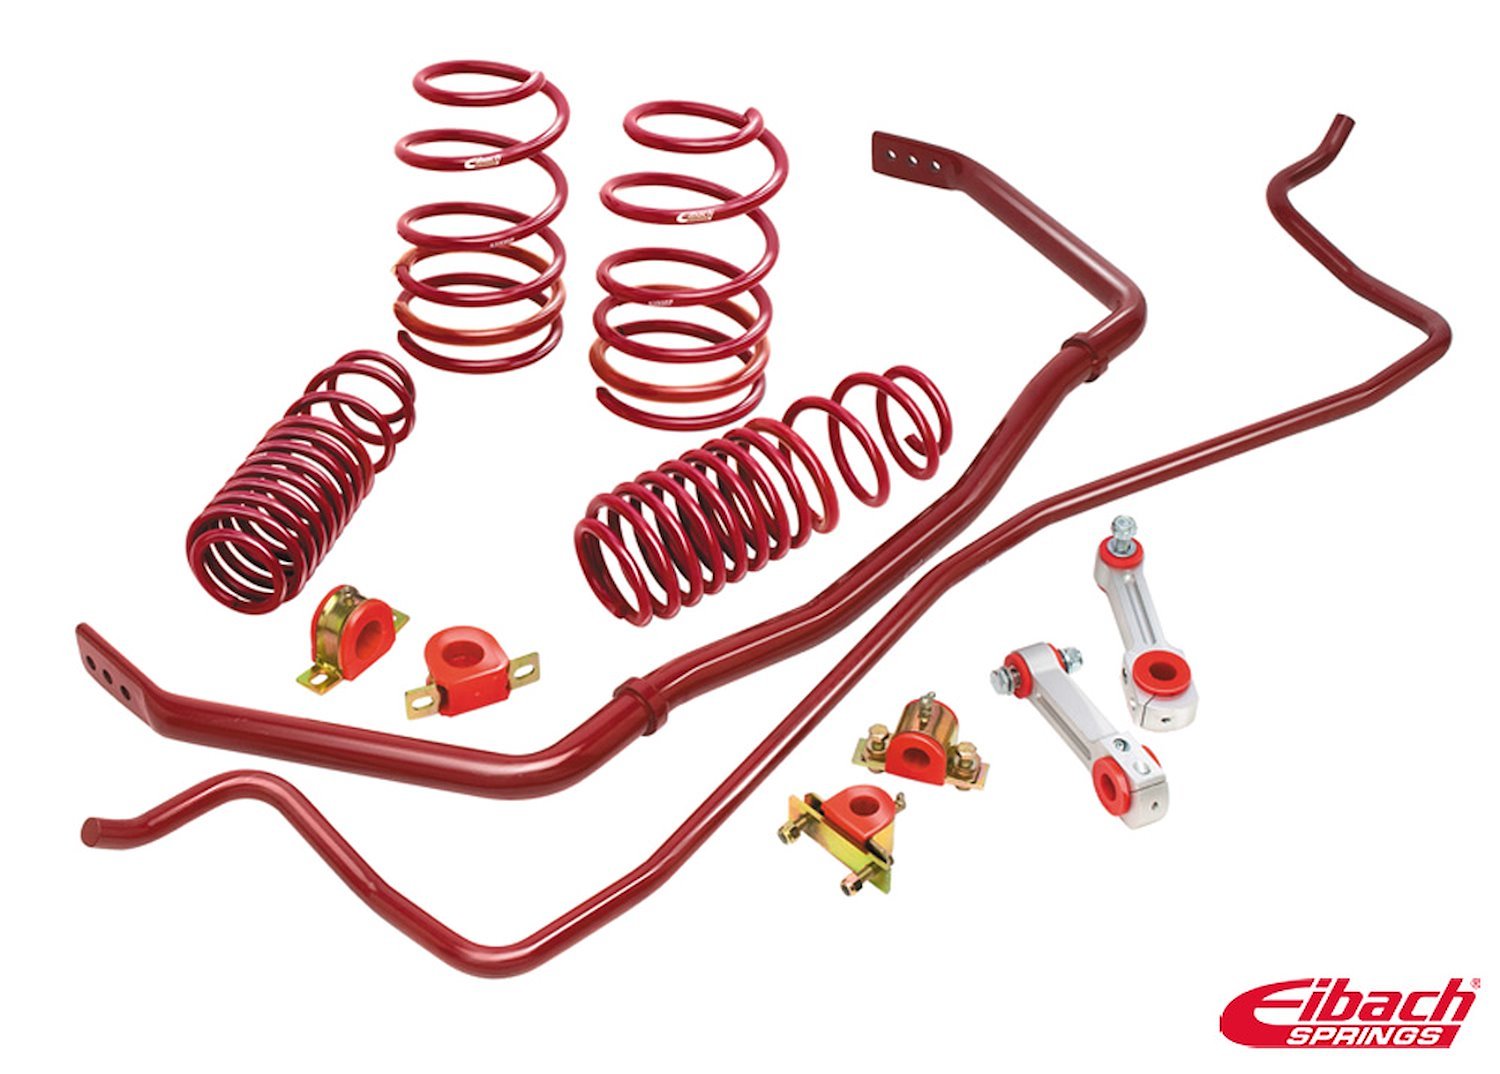 4.14535.880 Pro-System-Plus Suspension Kit 2015-2016 Ford Mustang